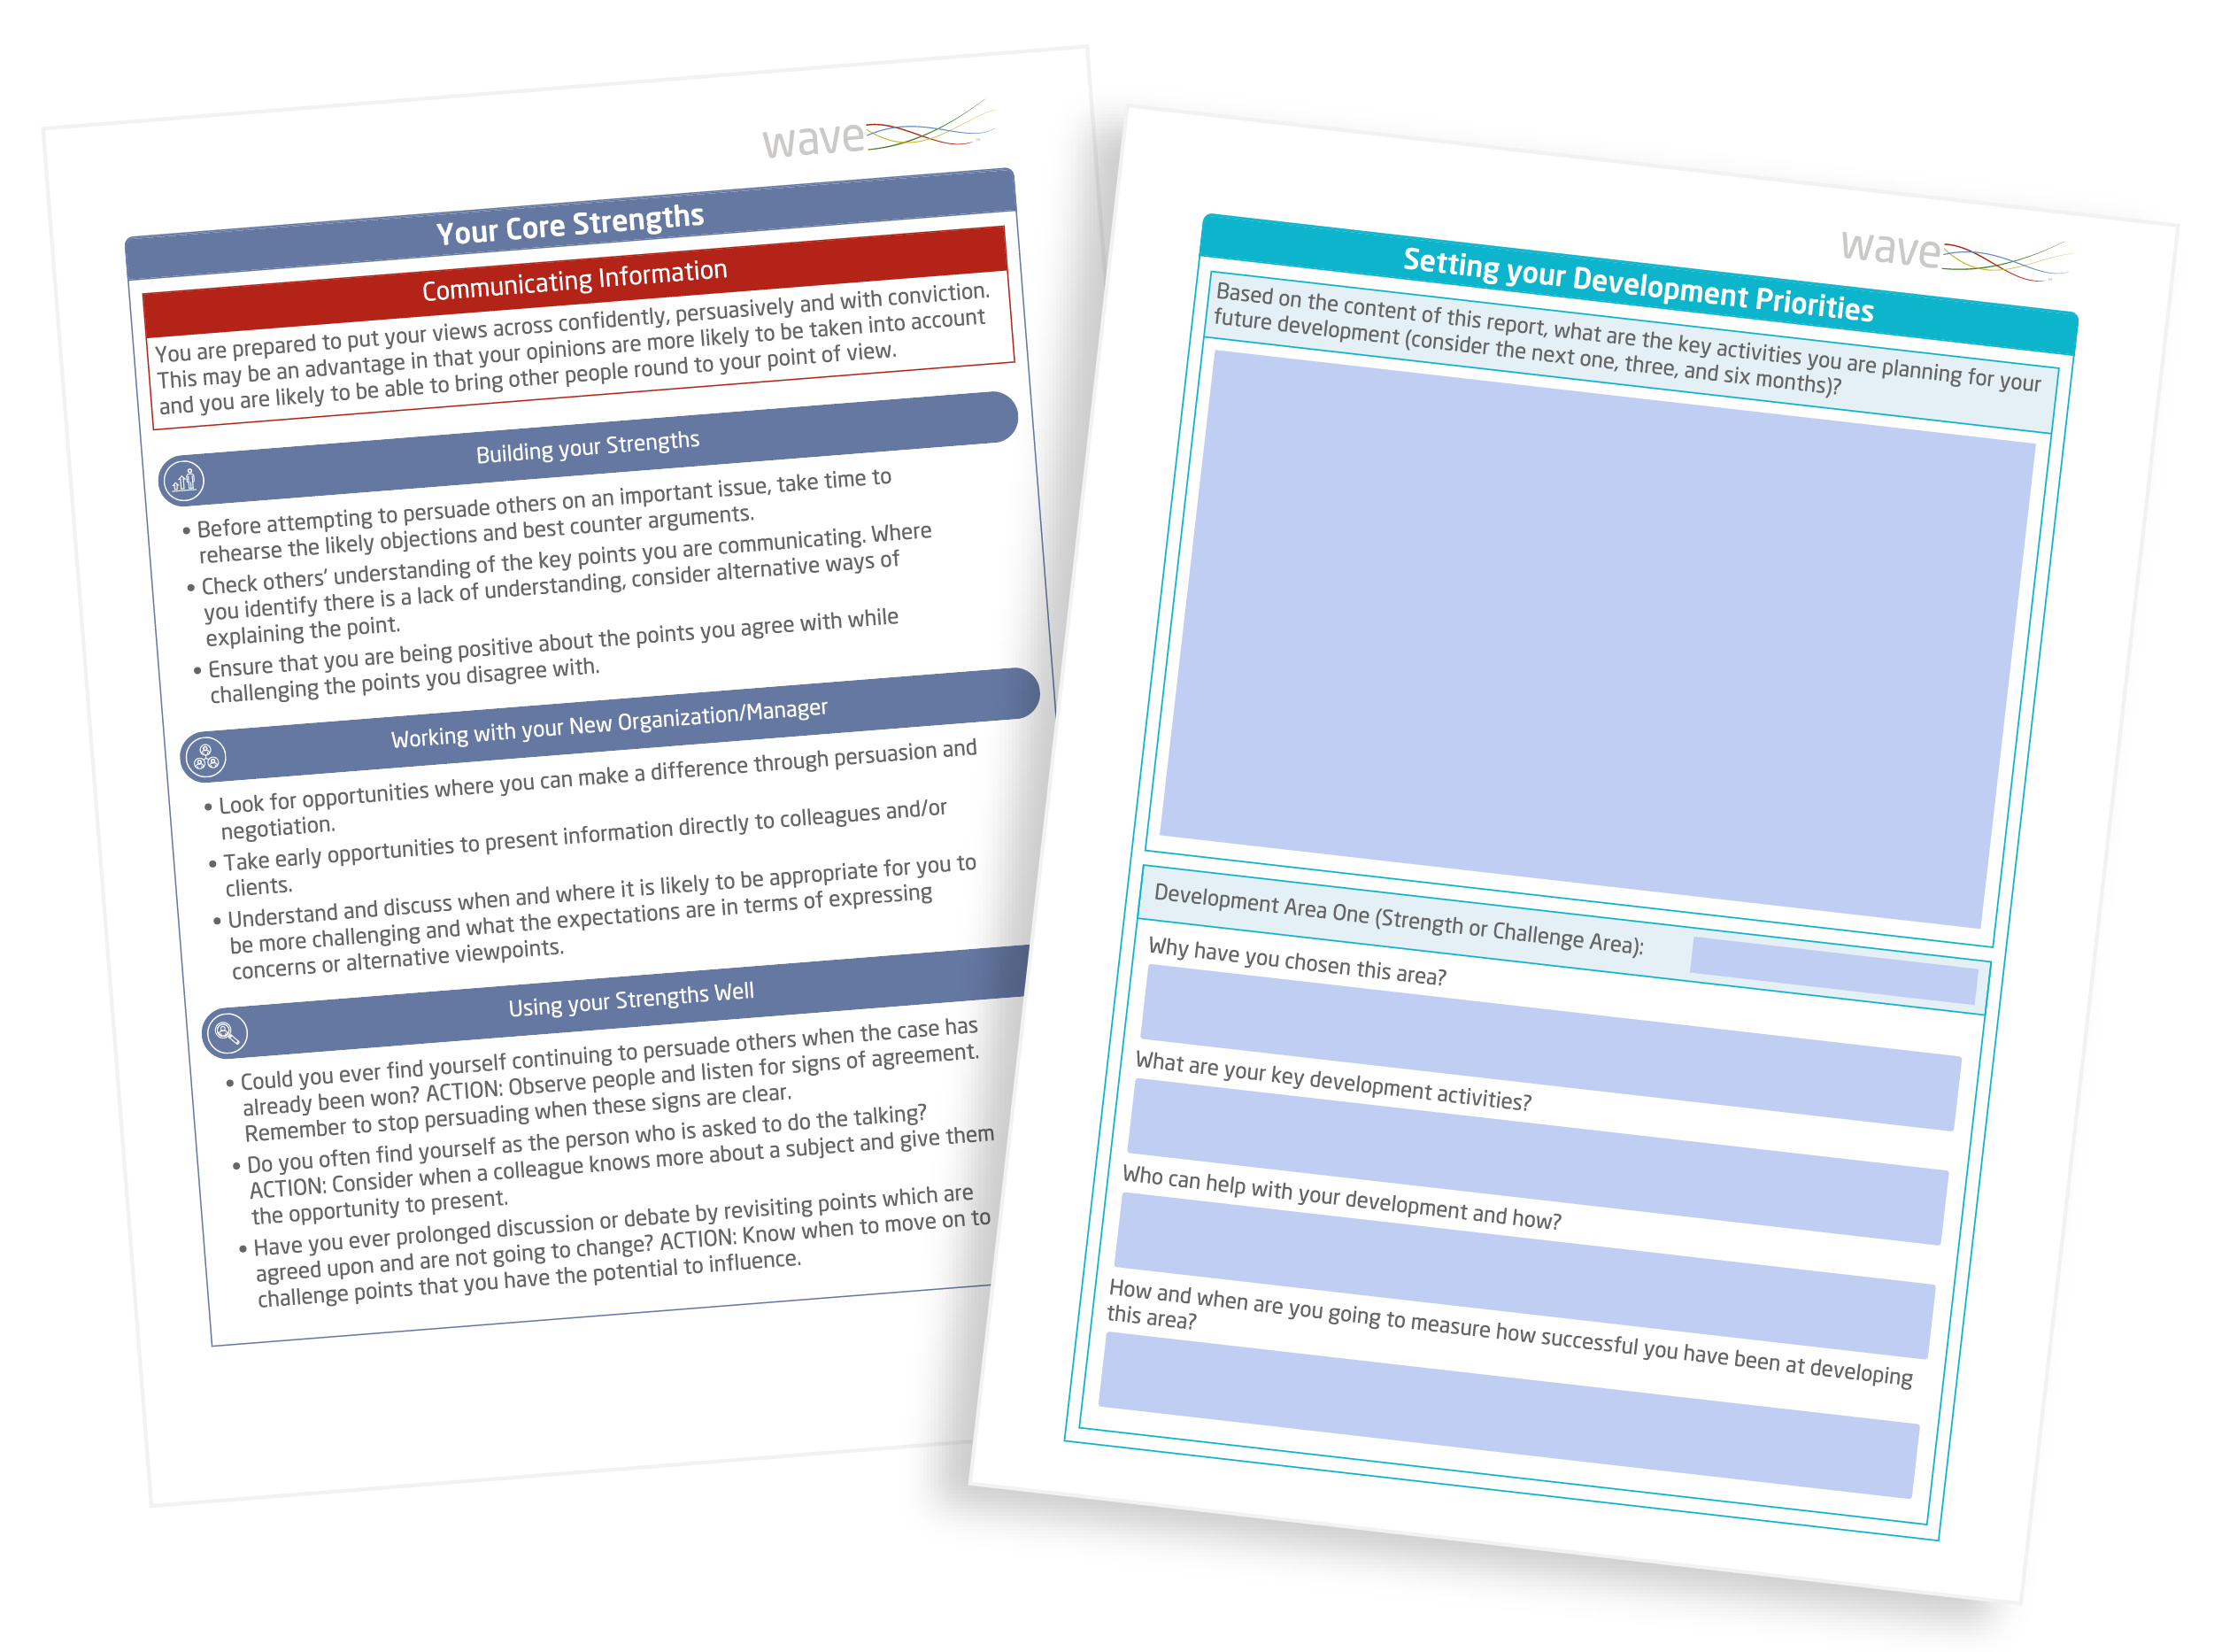 Onboarding report strengths and challenge areas